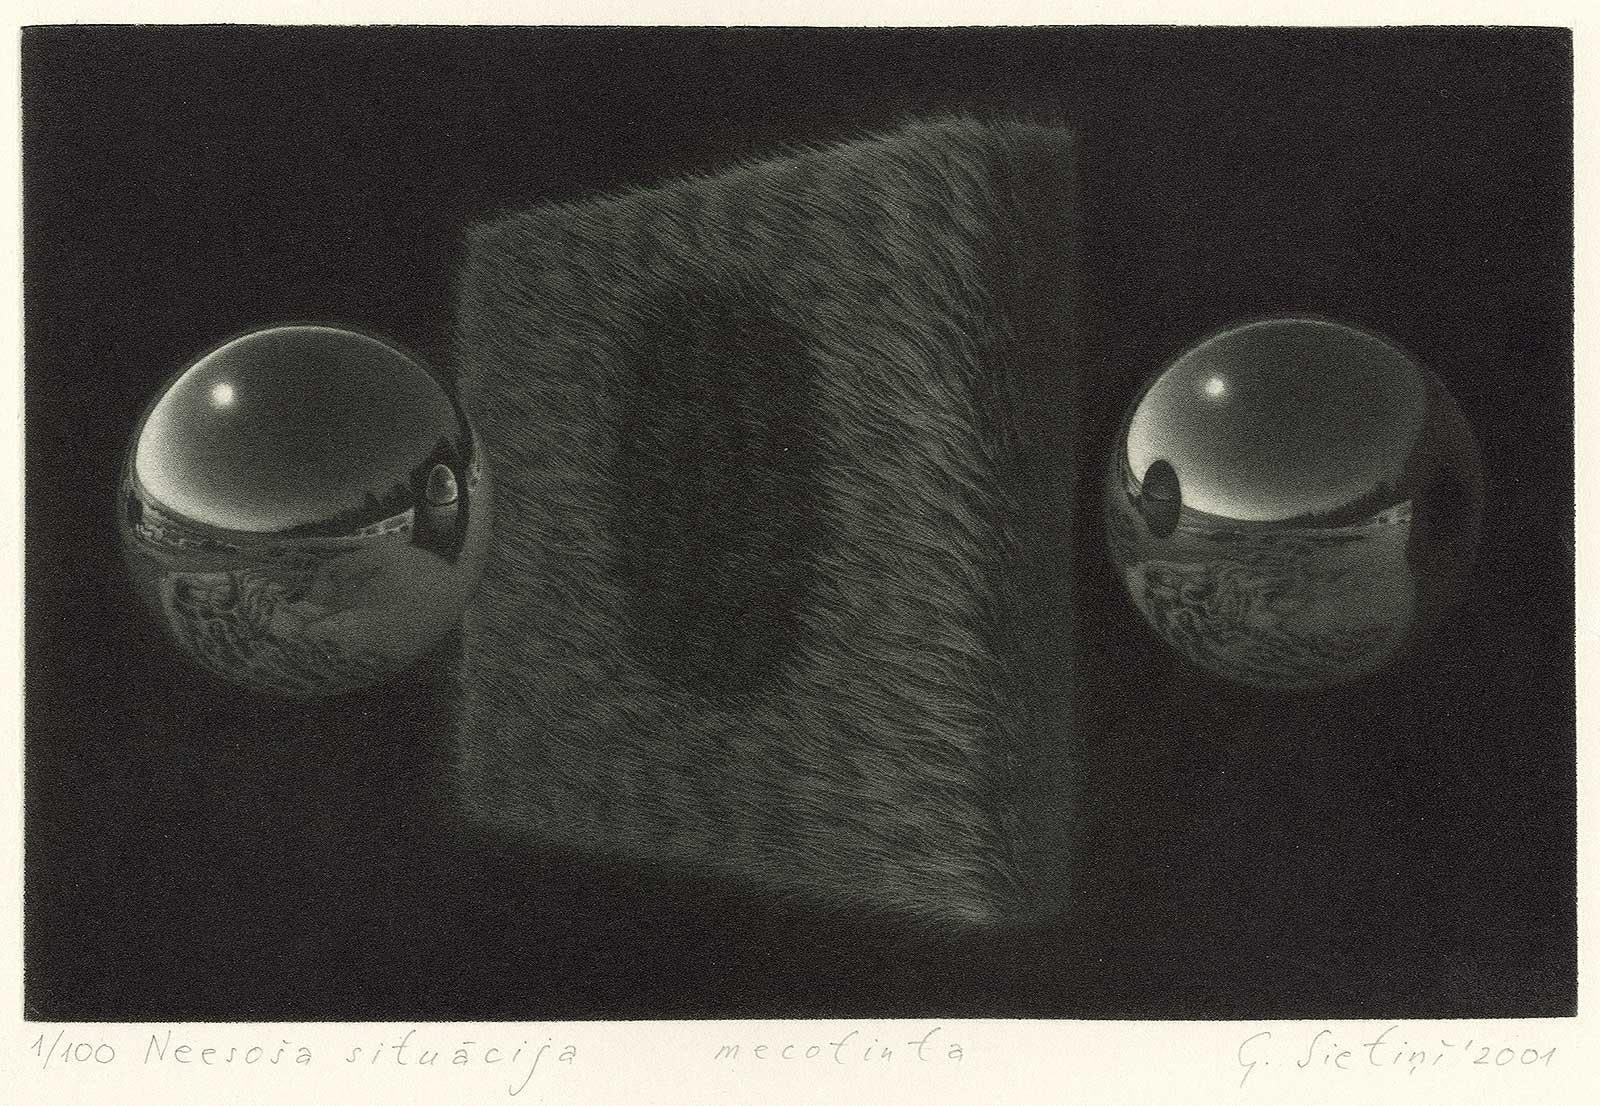 Non Sequitor (sphere represents a reflection of the past and a vision of future) - Abstract Print by Guntars Sietins